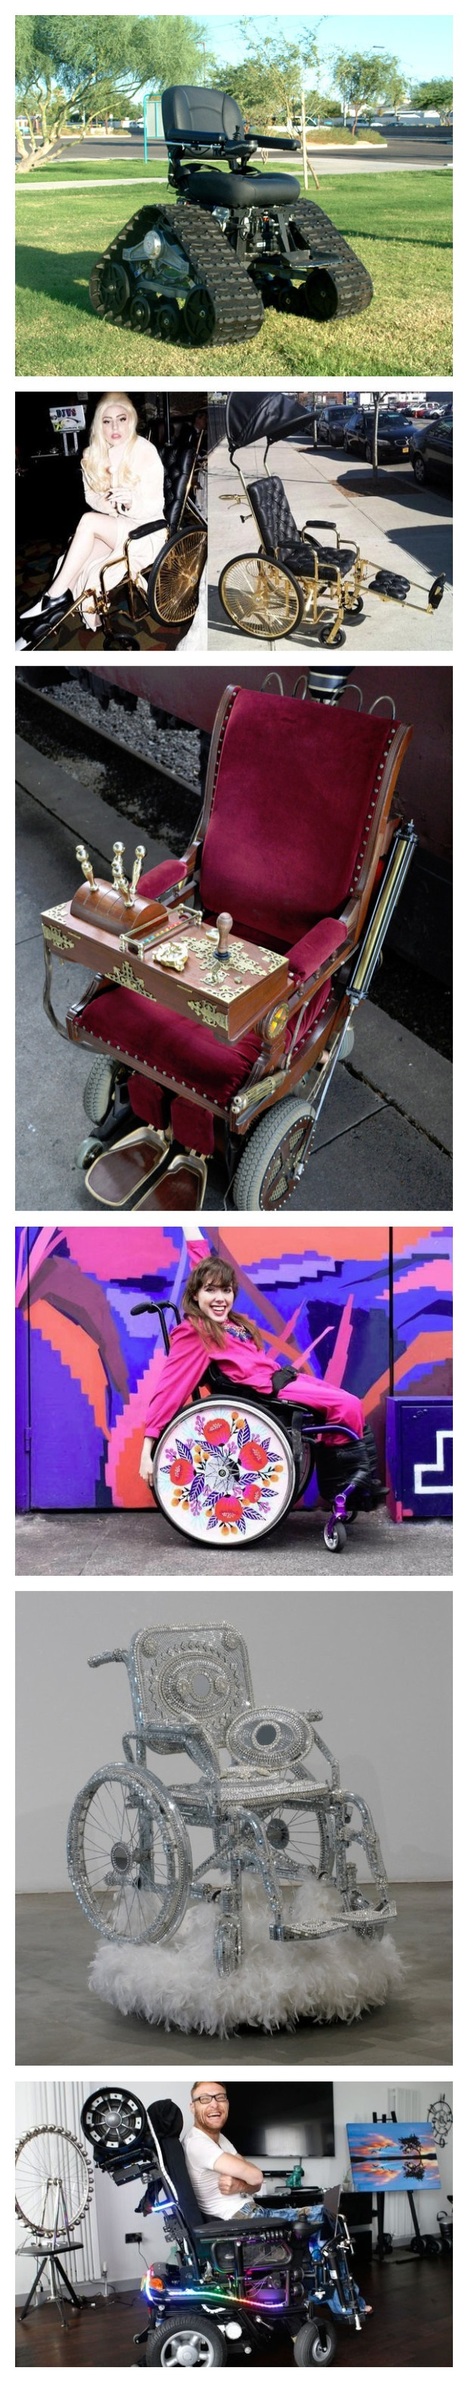 Amazing Pimped Out Wheelchairs